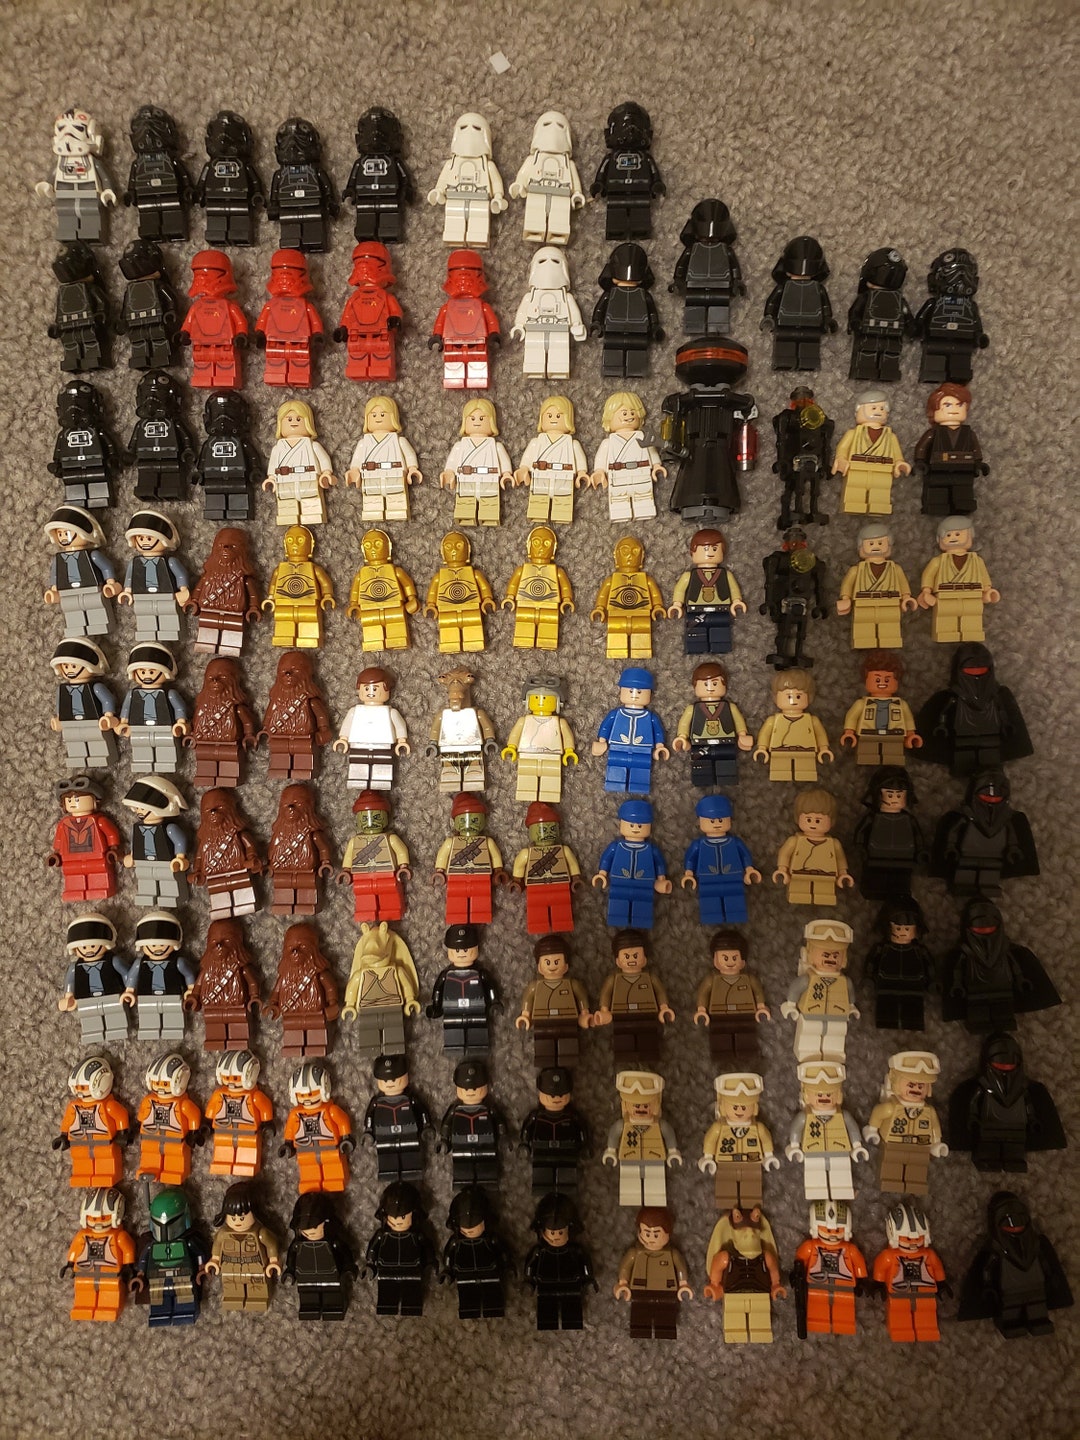 Lego Starwars wrapping paper or table dressing.